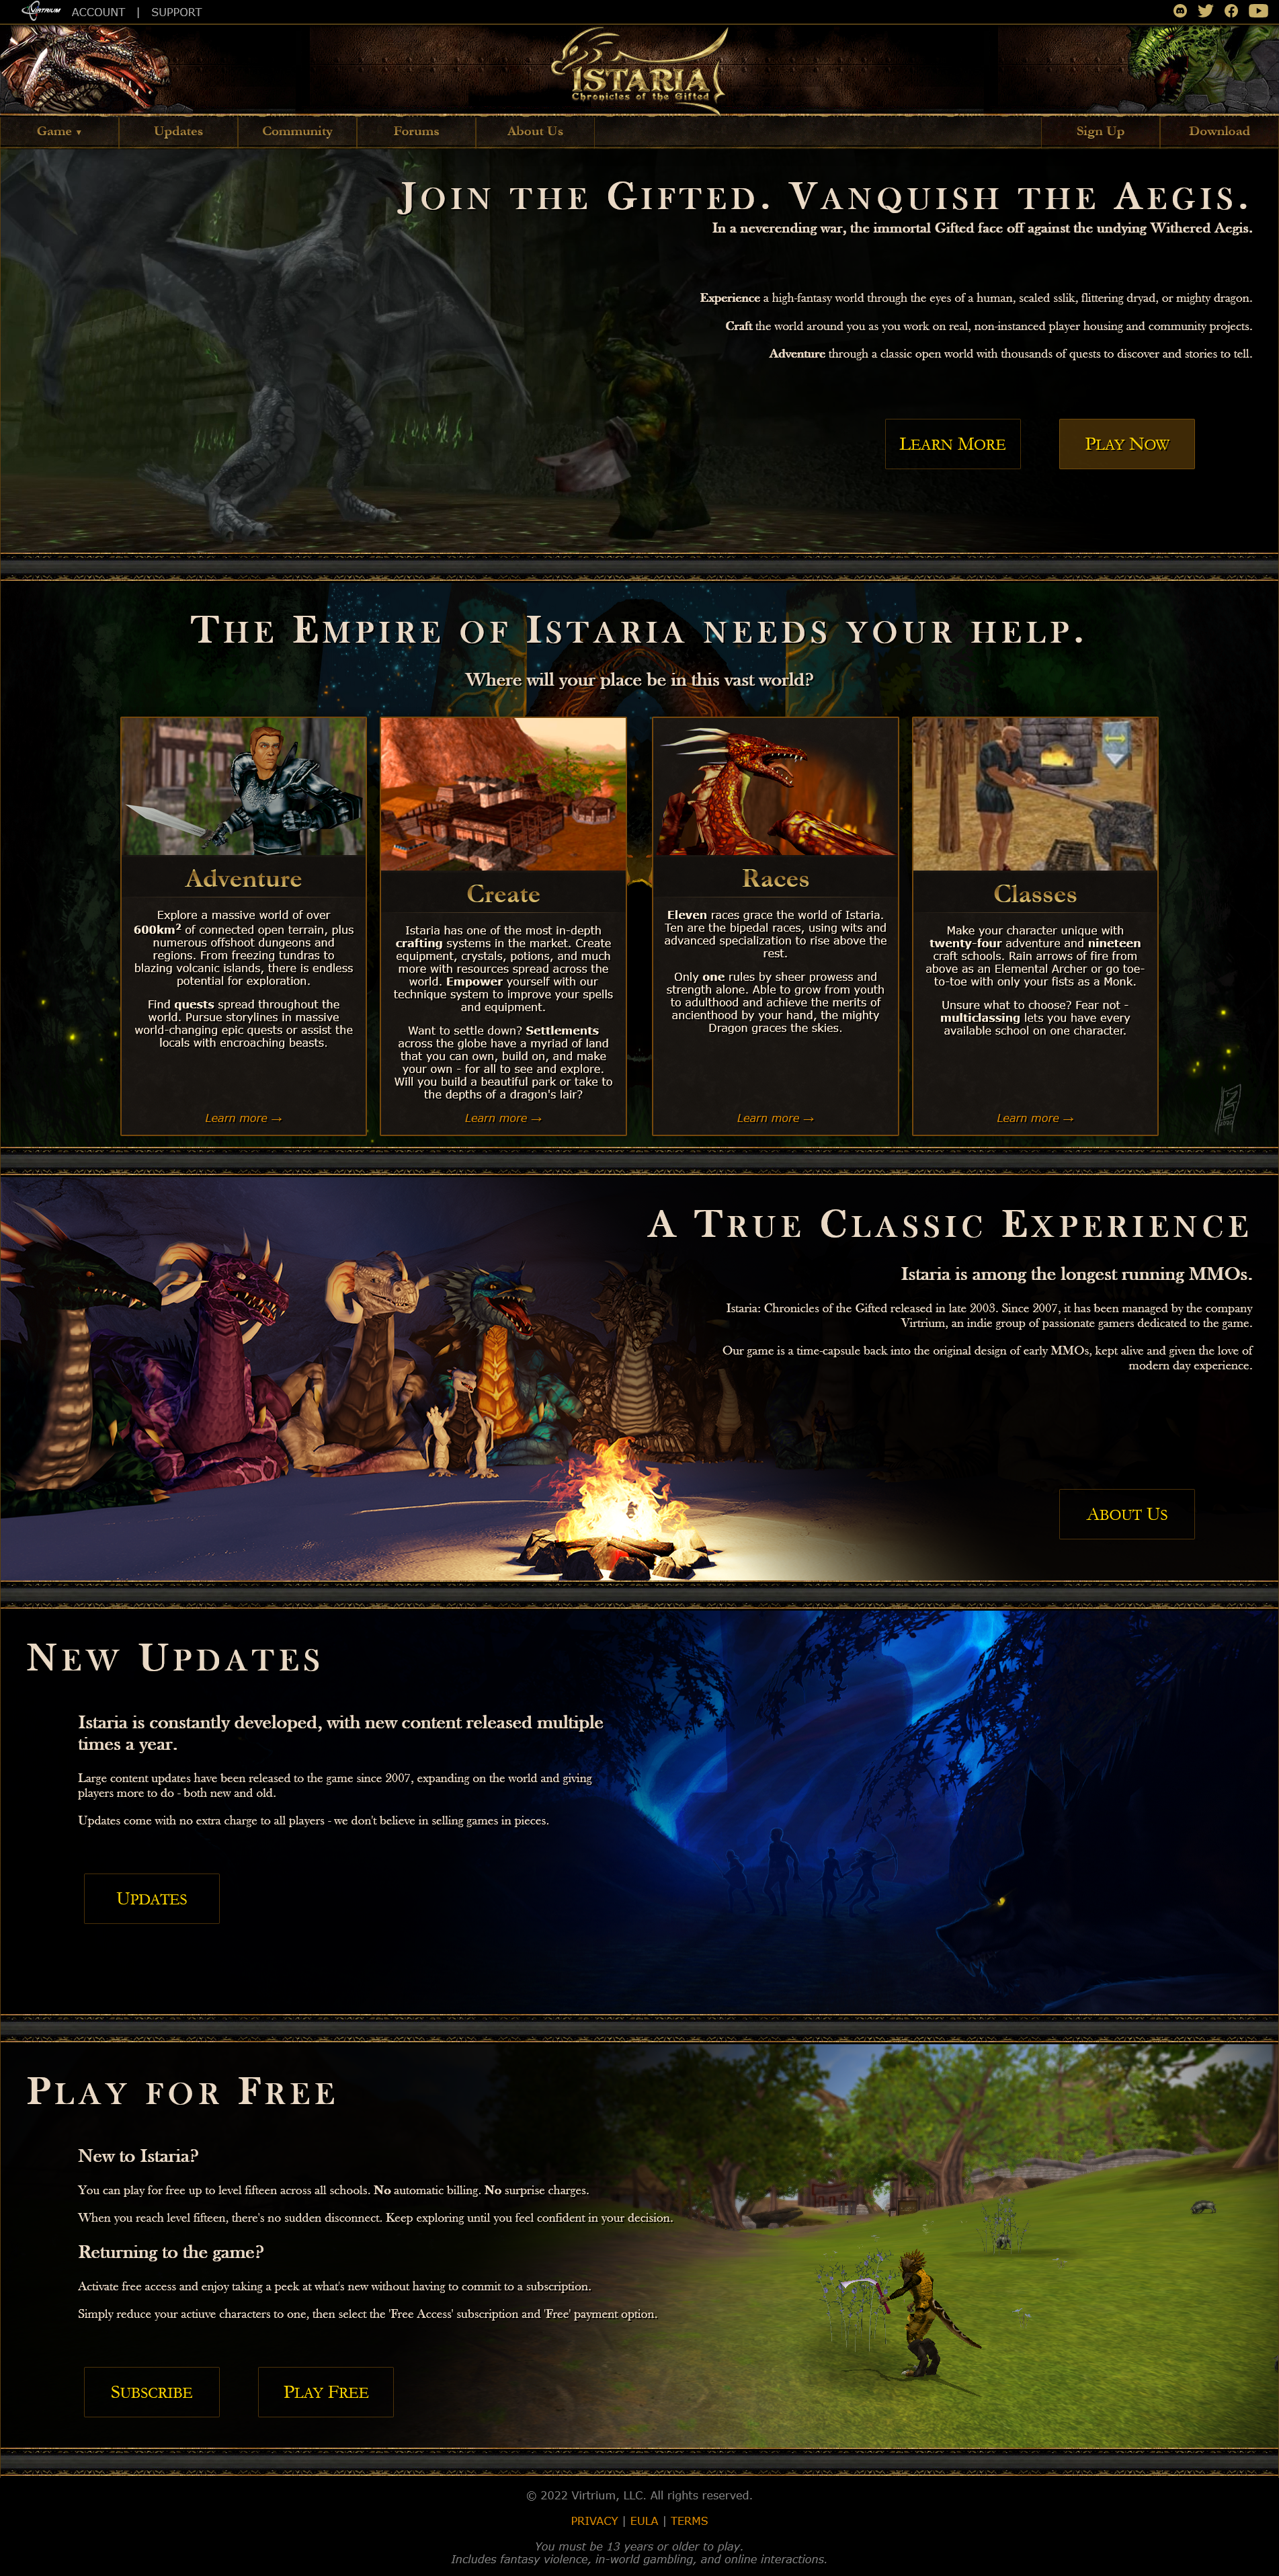 Preview image of the main Istaria homepage revamp.